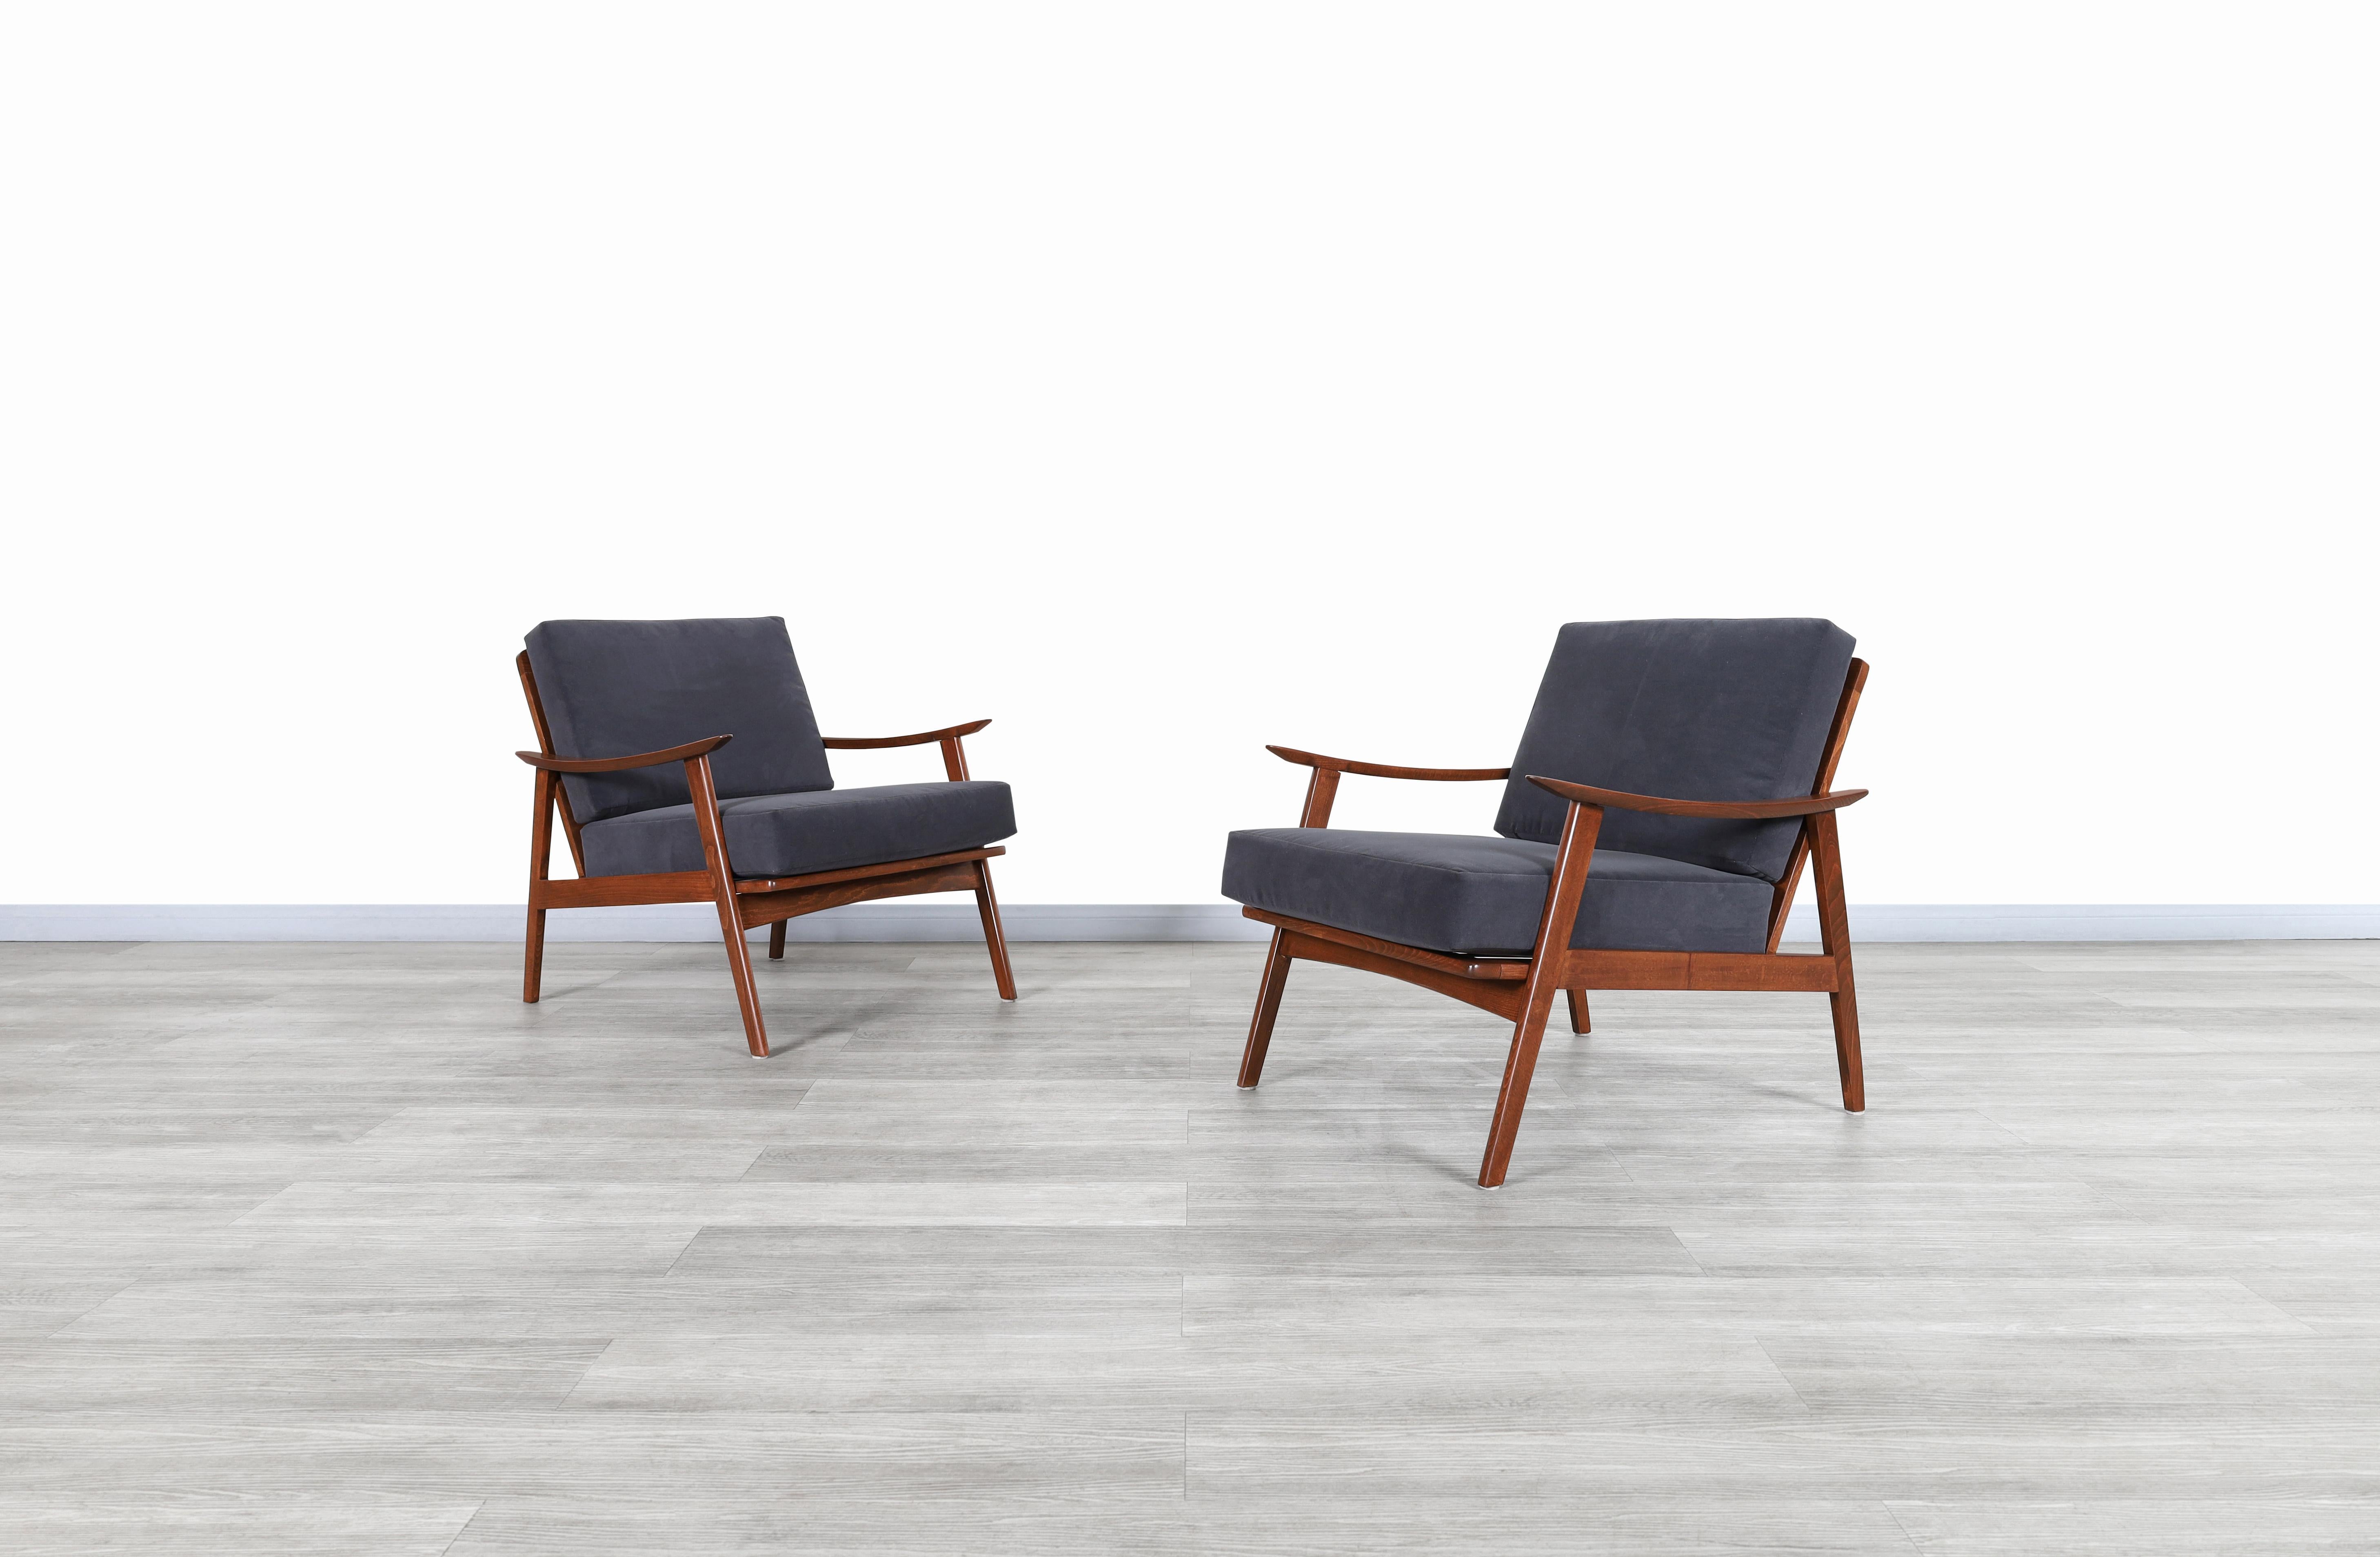 Fabulous Mid-Century Modern walnut lounge chairs designed and manufactured in United States, circa 1950s. These chairs have a great distinctive design for their era. Our skilled artisans have completely restored each chair. They feature